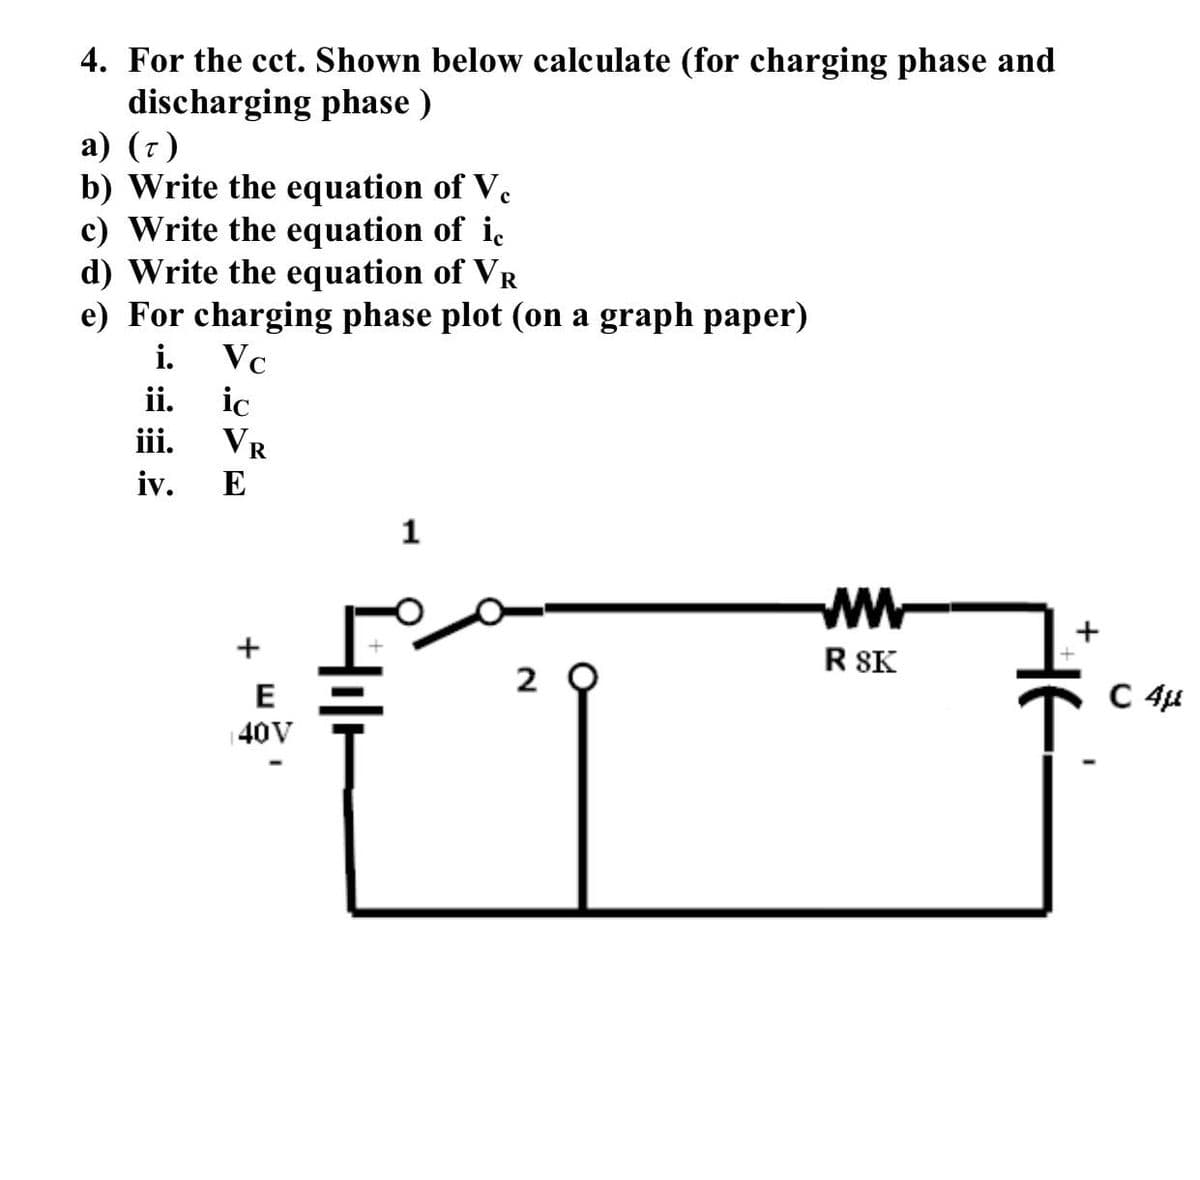 4. For the cct. Shown below calculate (for charging phase and
discharging phase)
a) (7)
b) Write the equation of Ve
c) Write the equation of ic
d) Write the equation of VR
e) For charging phase plot (on a graph paper)
i.
Vc
ii.
ic
iii.
iv.
VR
E
+
E
40V
1
Hilt
20
W www
R SK
+
C 4μ